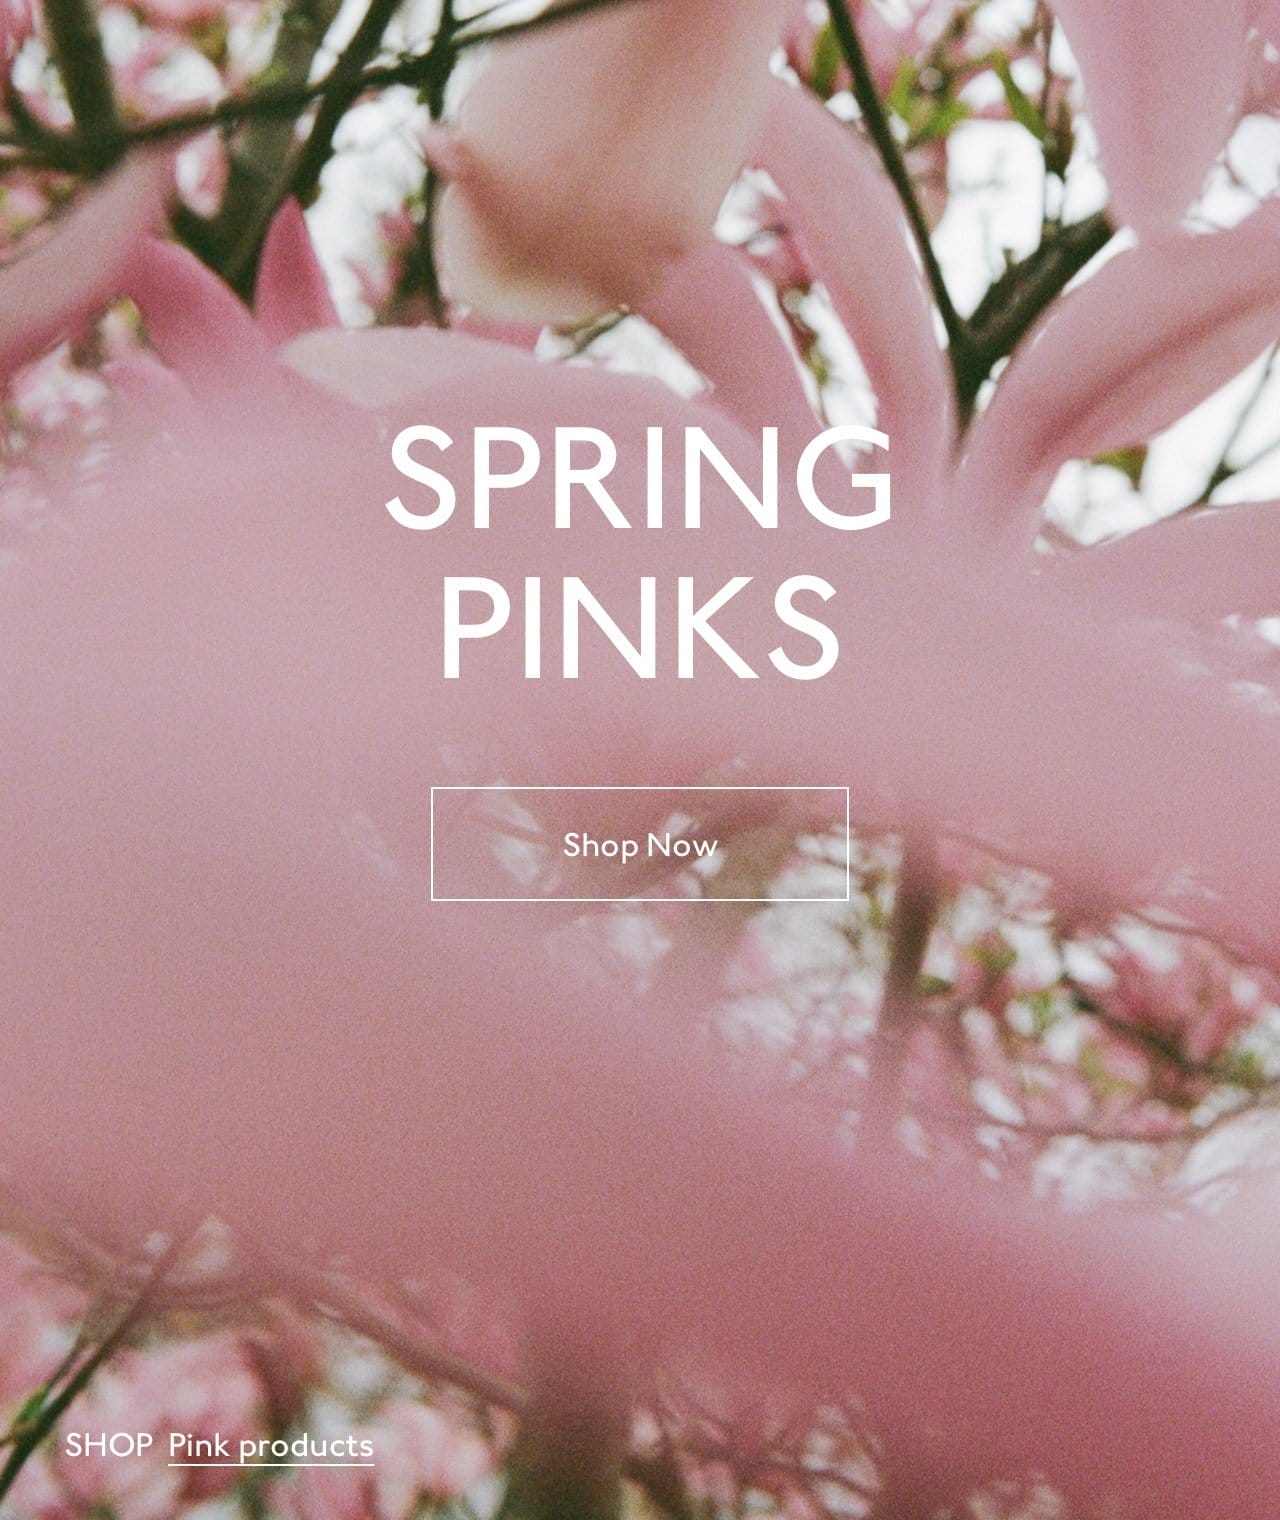 Shop pink pieces. Picutred: cherry blossoms in bloom.